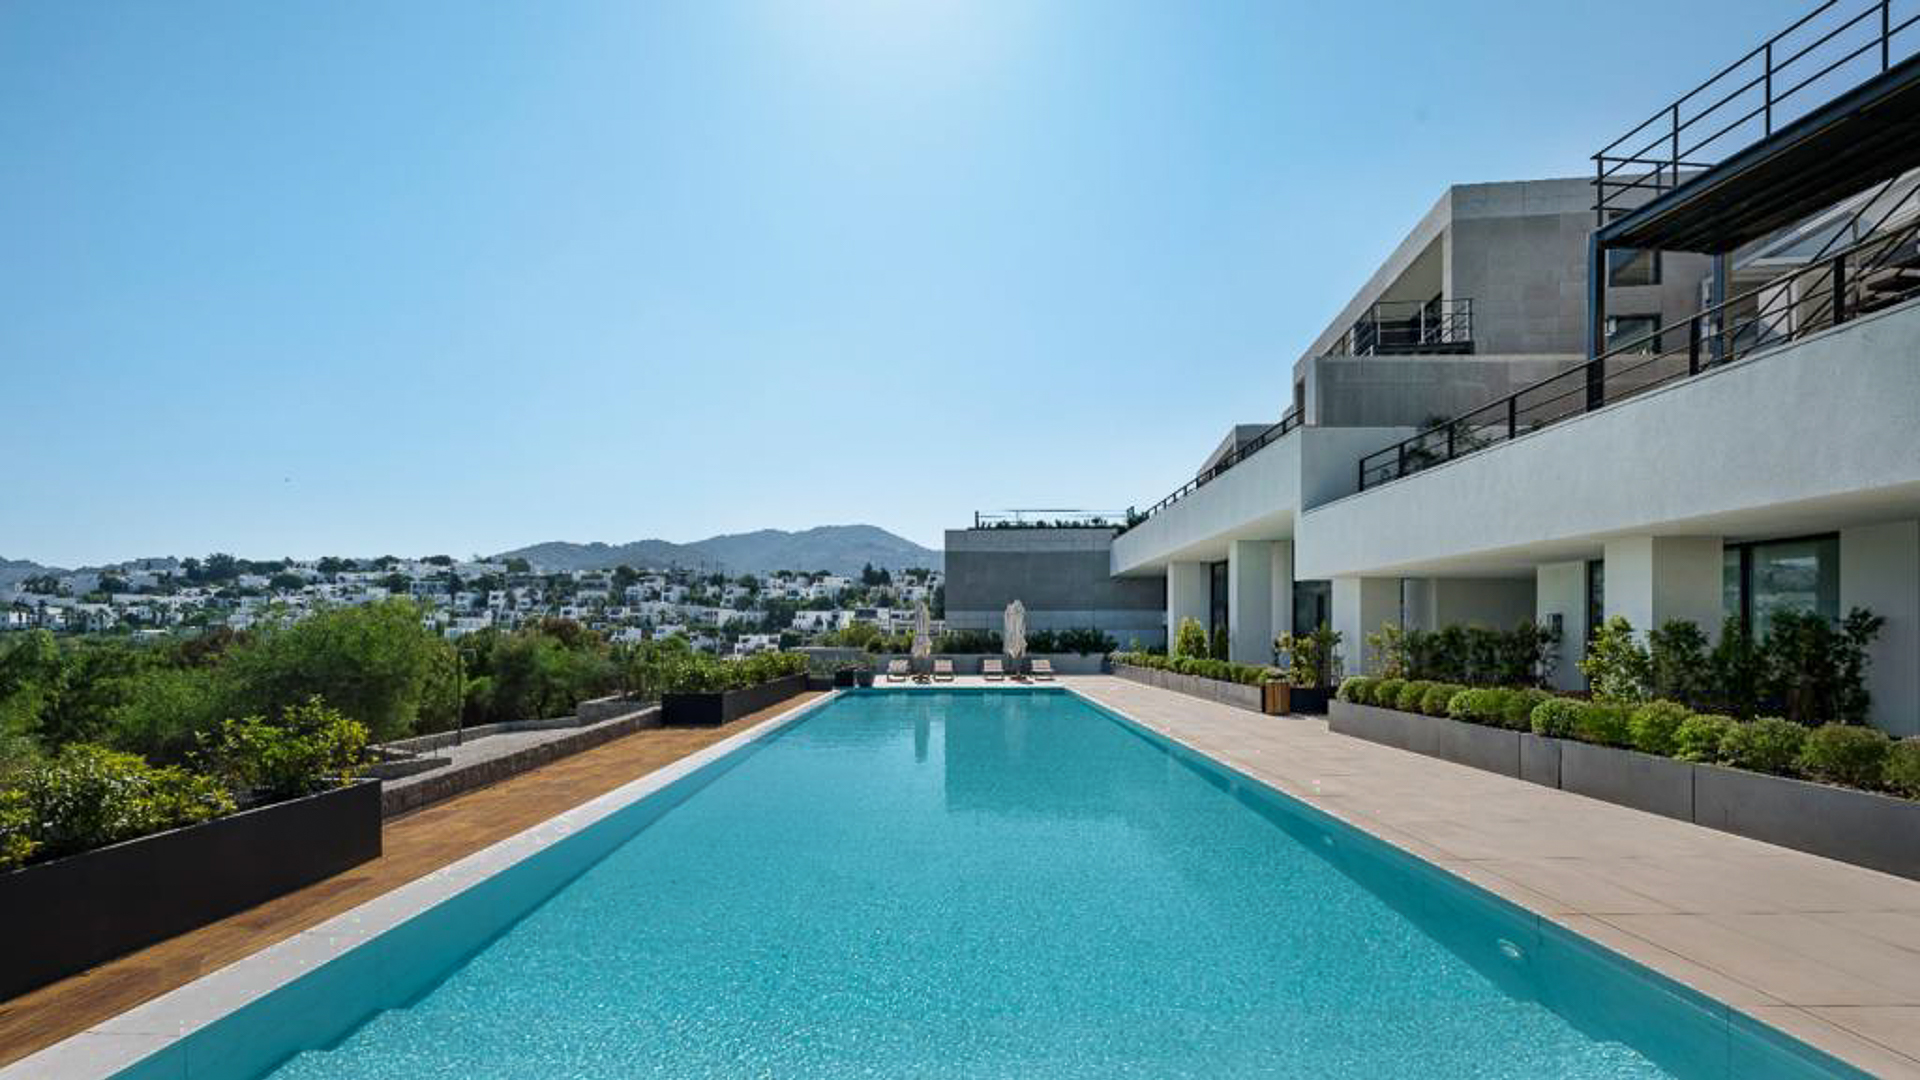 Property Image 2 - Villa in Bodrum for Glitz and Glamour